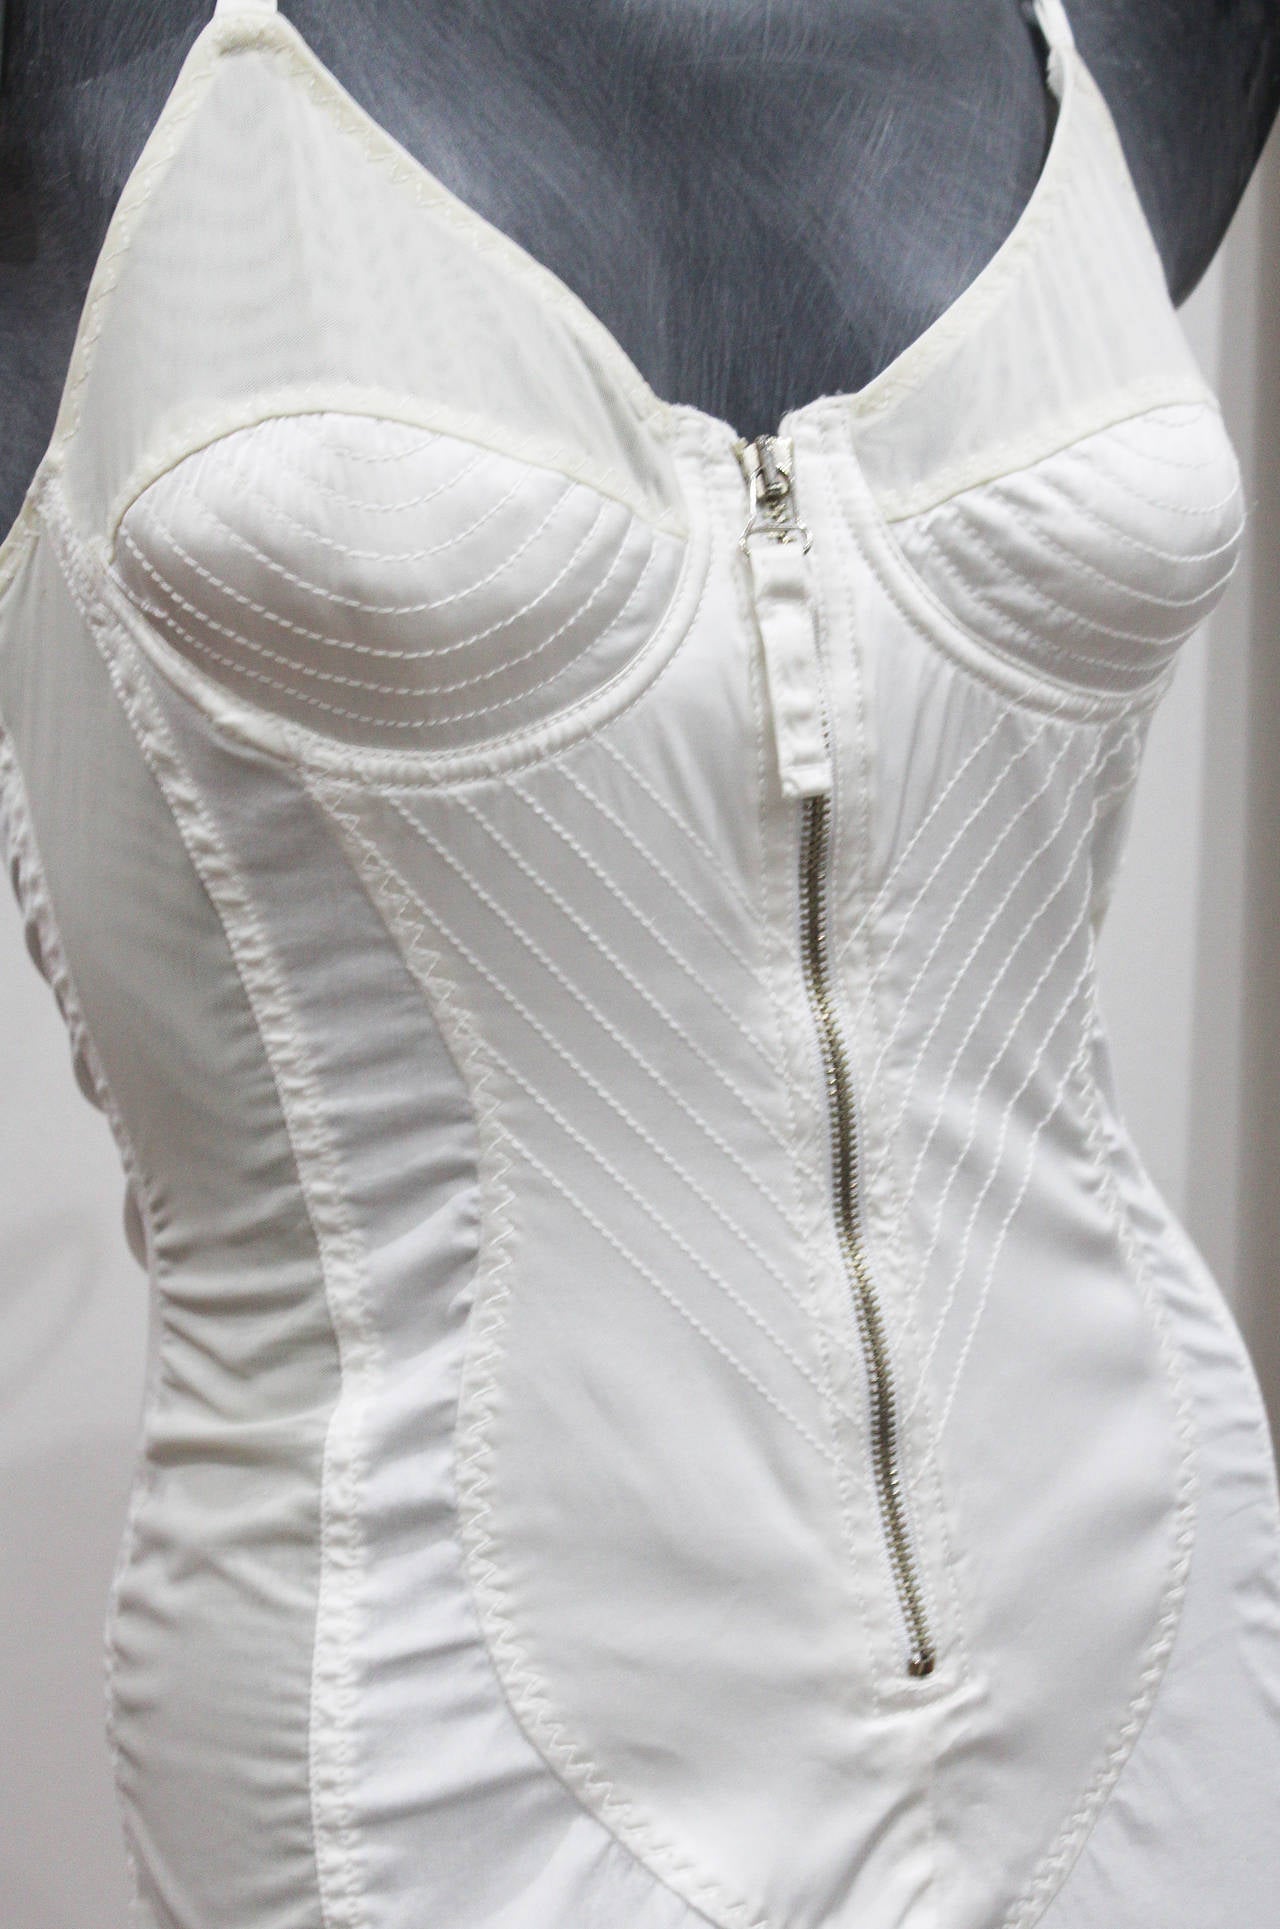 Jean Paul Gaultier corset dress. white satin with white stretch cotton, inside pockets to insert pads for the ultimate Gaultier/Madonna look and silk tie up halter neck design. Lace up back with metal zippers. circa 1987, France. 

Size: Fr 38 - 40